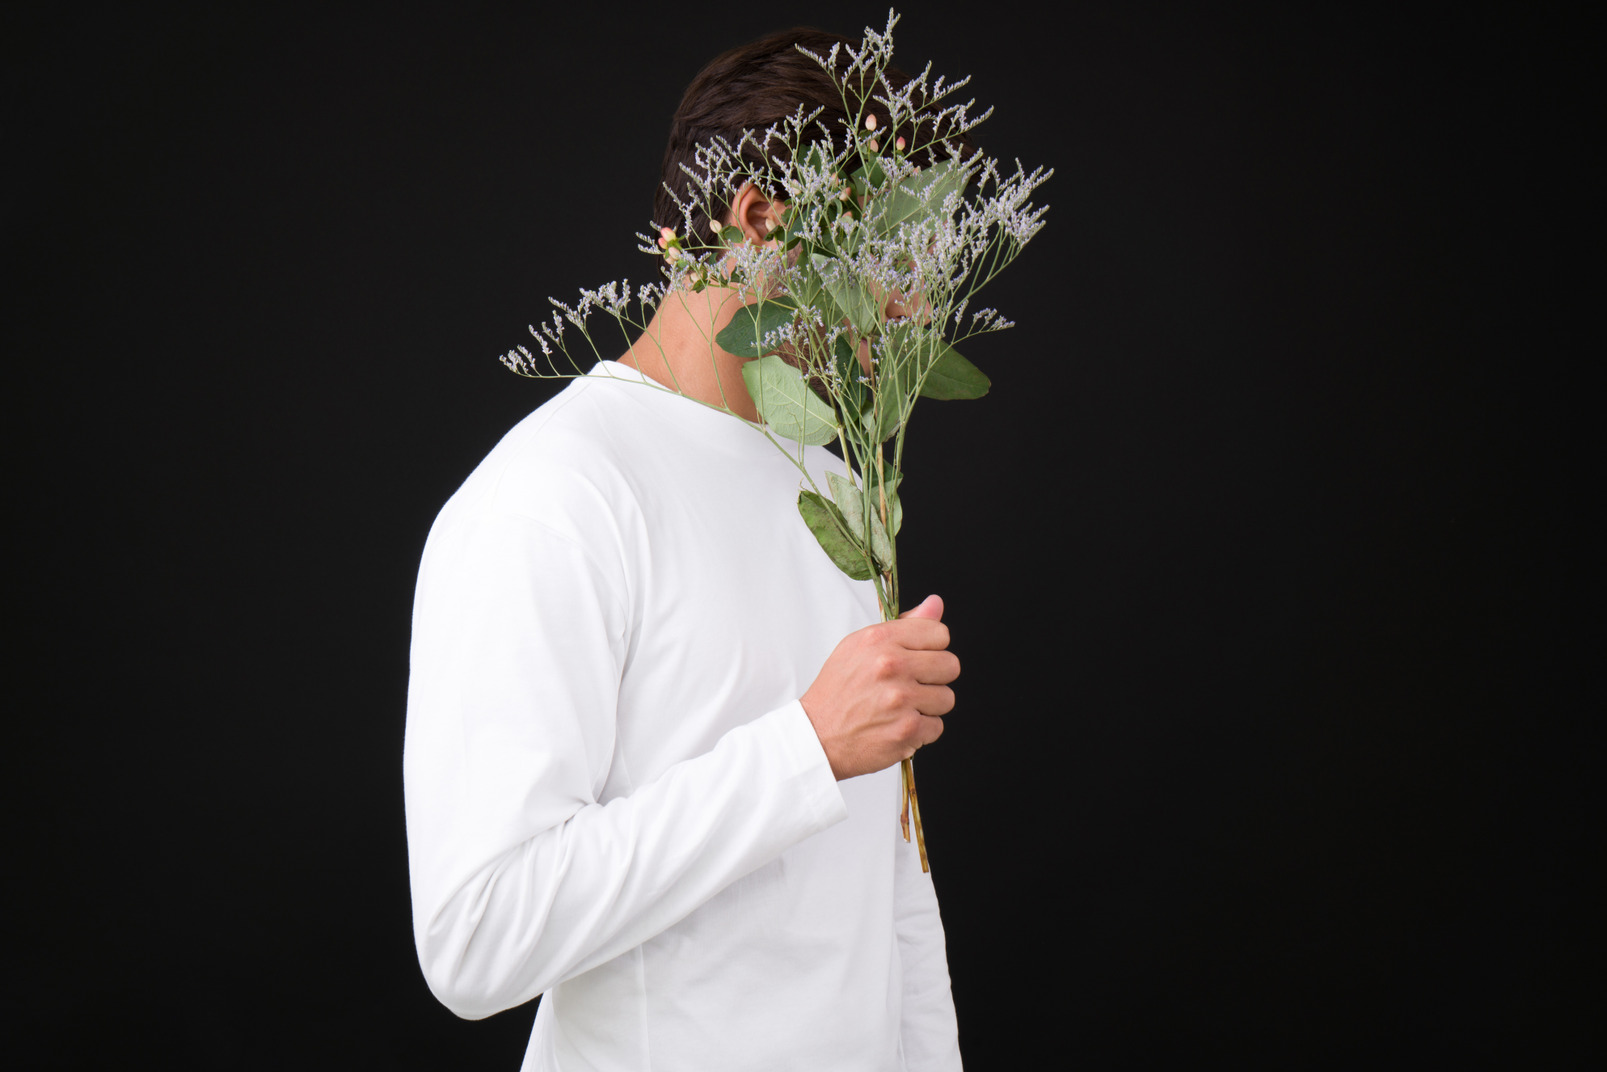 Shy young man hiding his face in a bunch of flowers